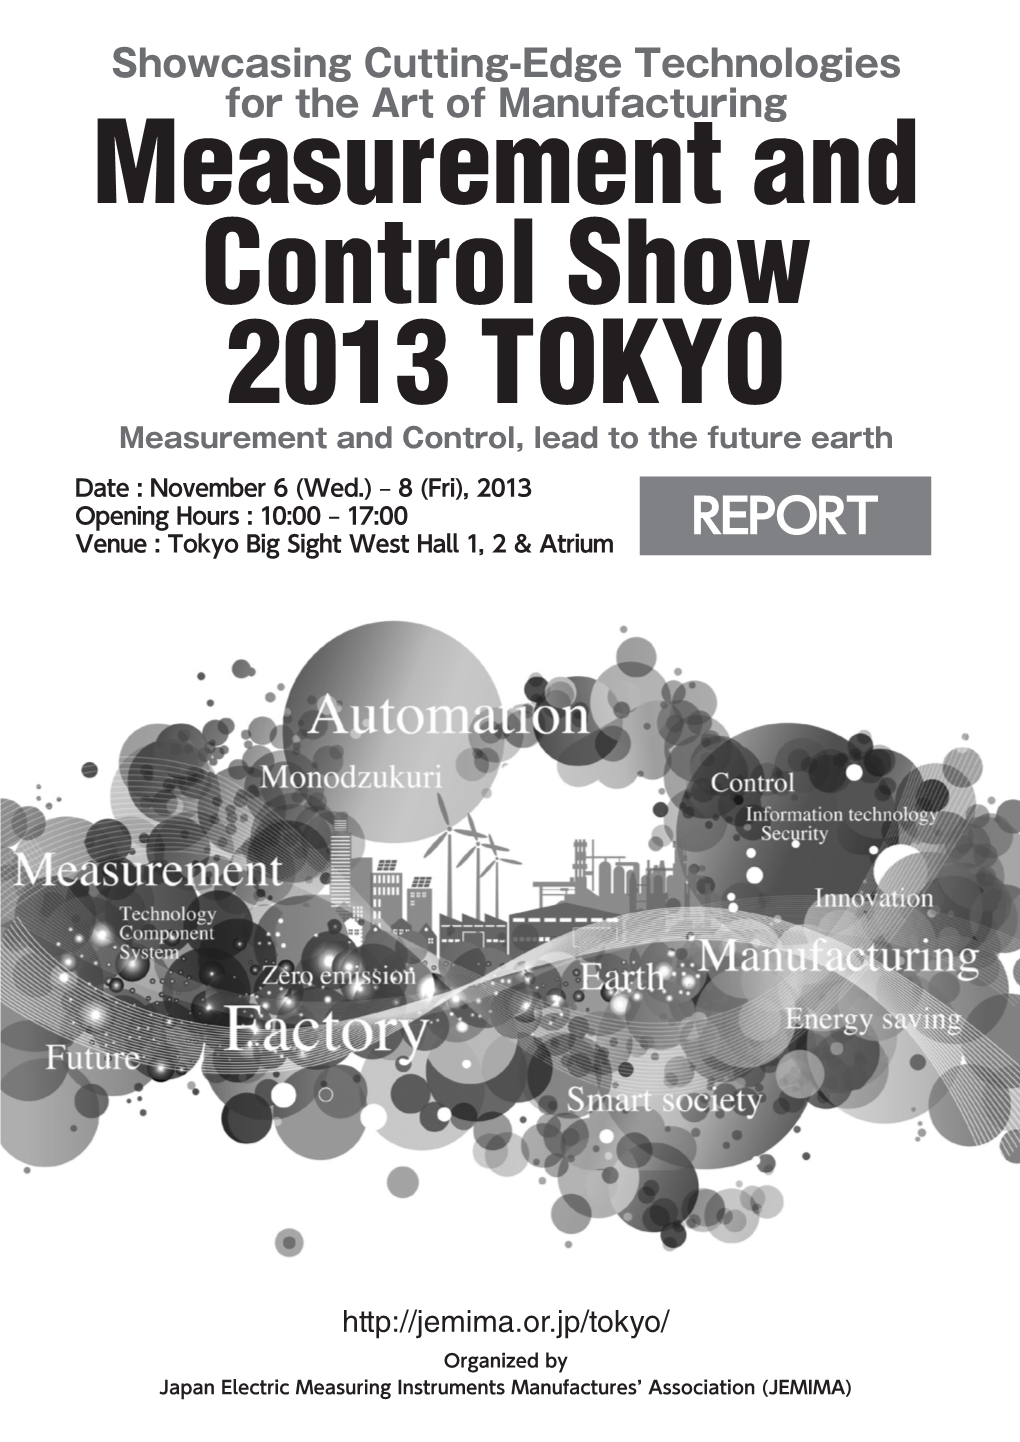 Measurement and Control Show 2013 TOKYO Measurement and Control, Lead to the Future Earth